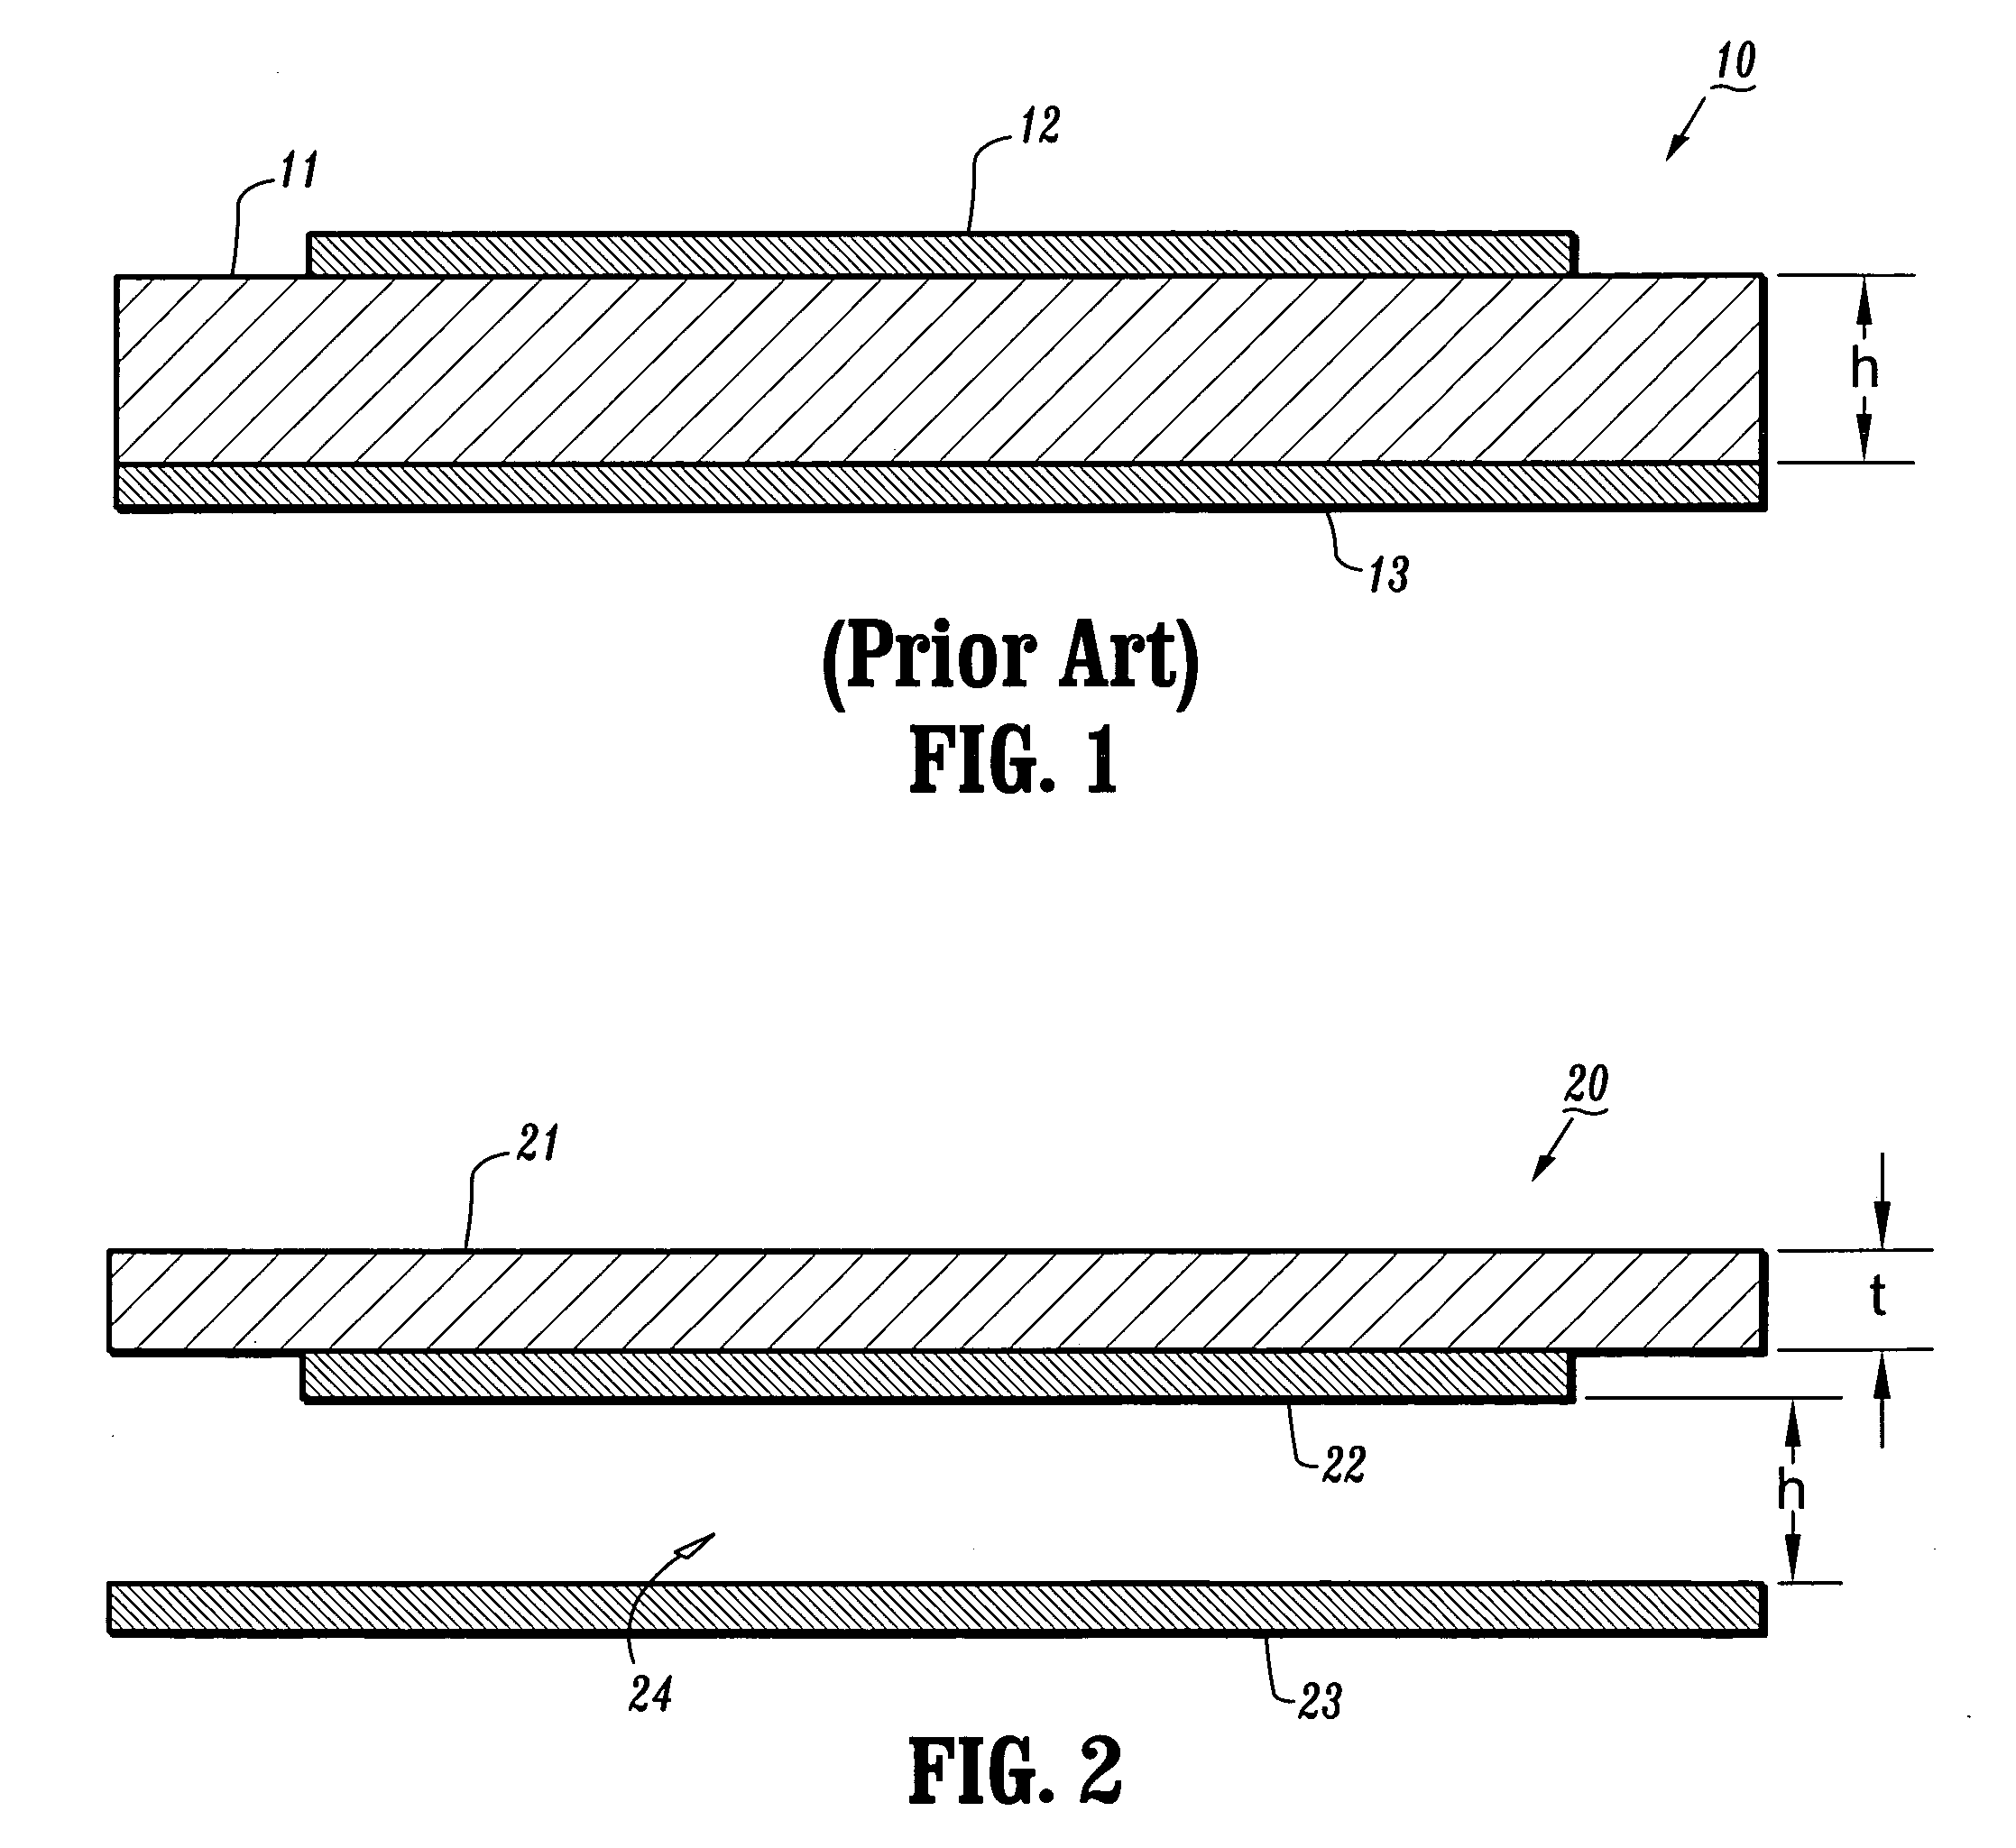 Apparatus and method for constructing and packaging printed antenna devices